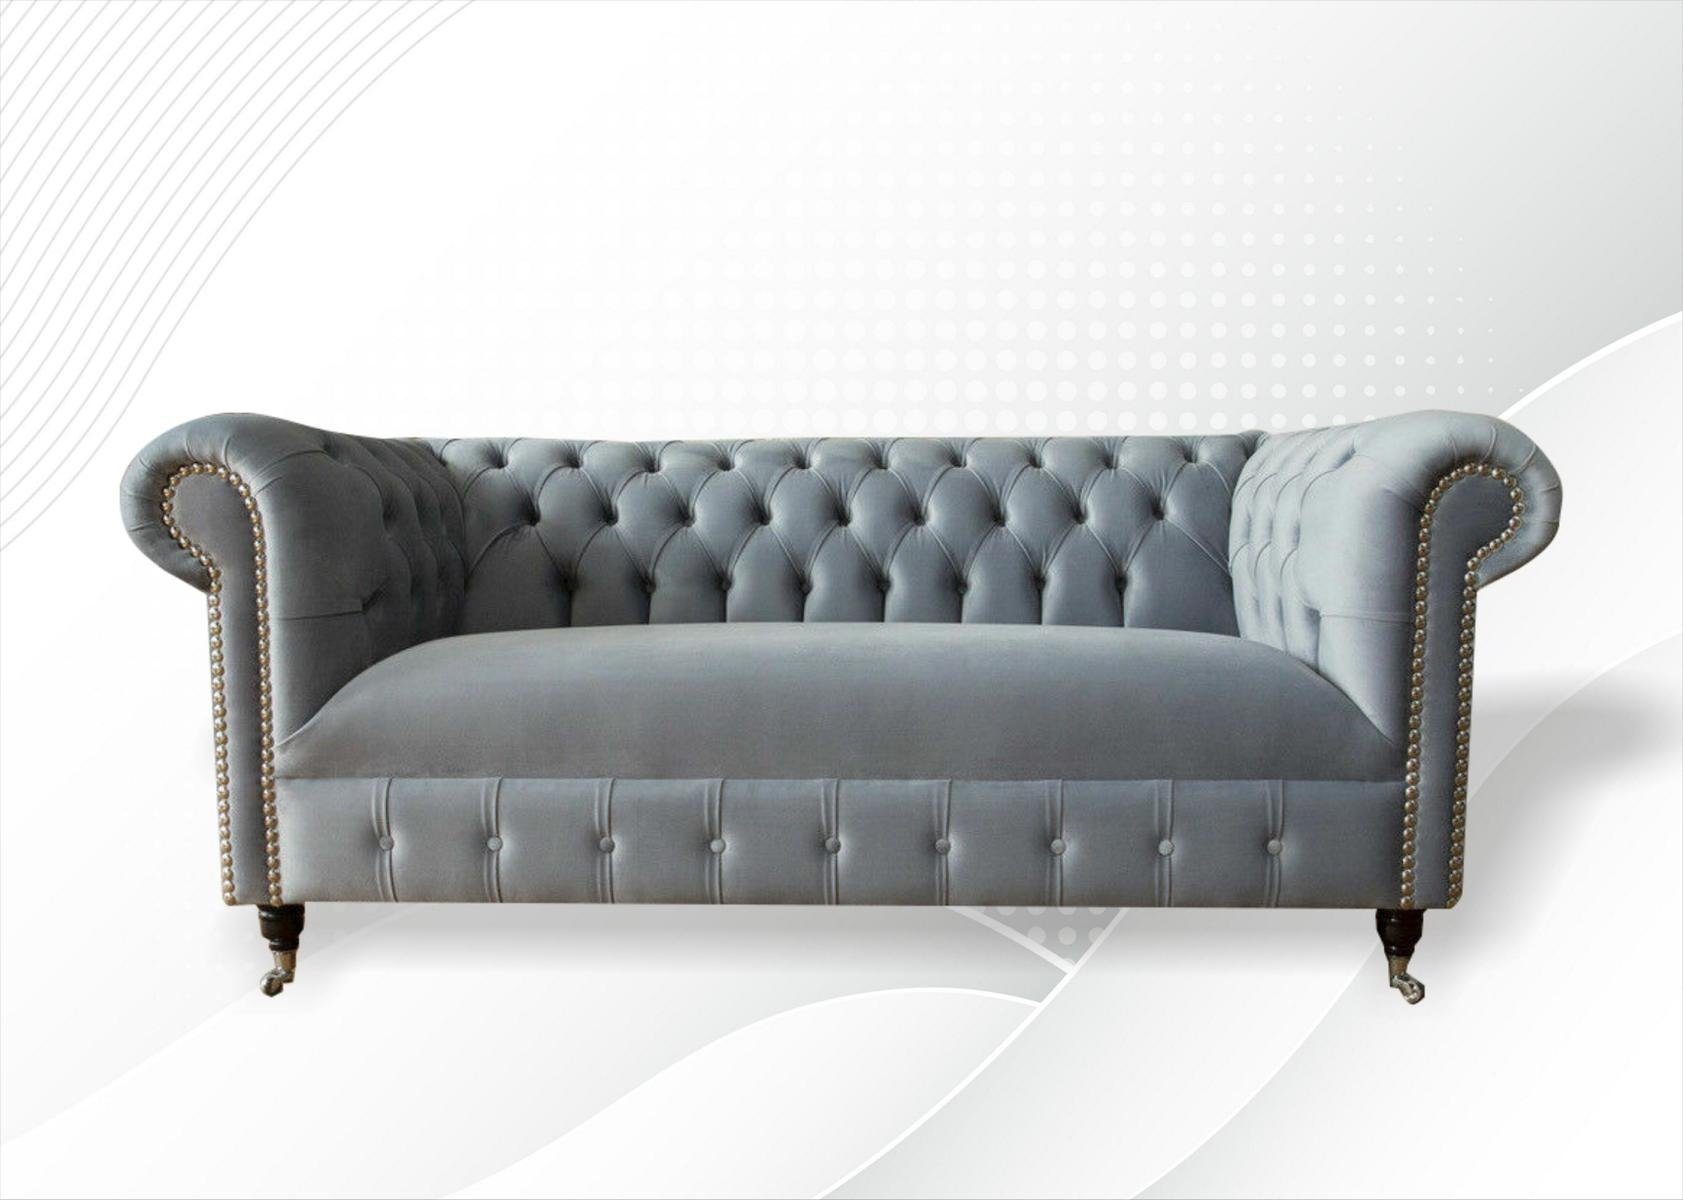 Textilmöbel, Couch Stoff Couchen Chesterfield Polster in Made Leder Sofa Europe JVmoebel Sofa